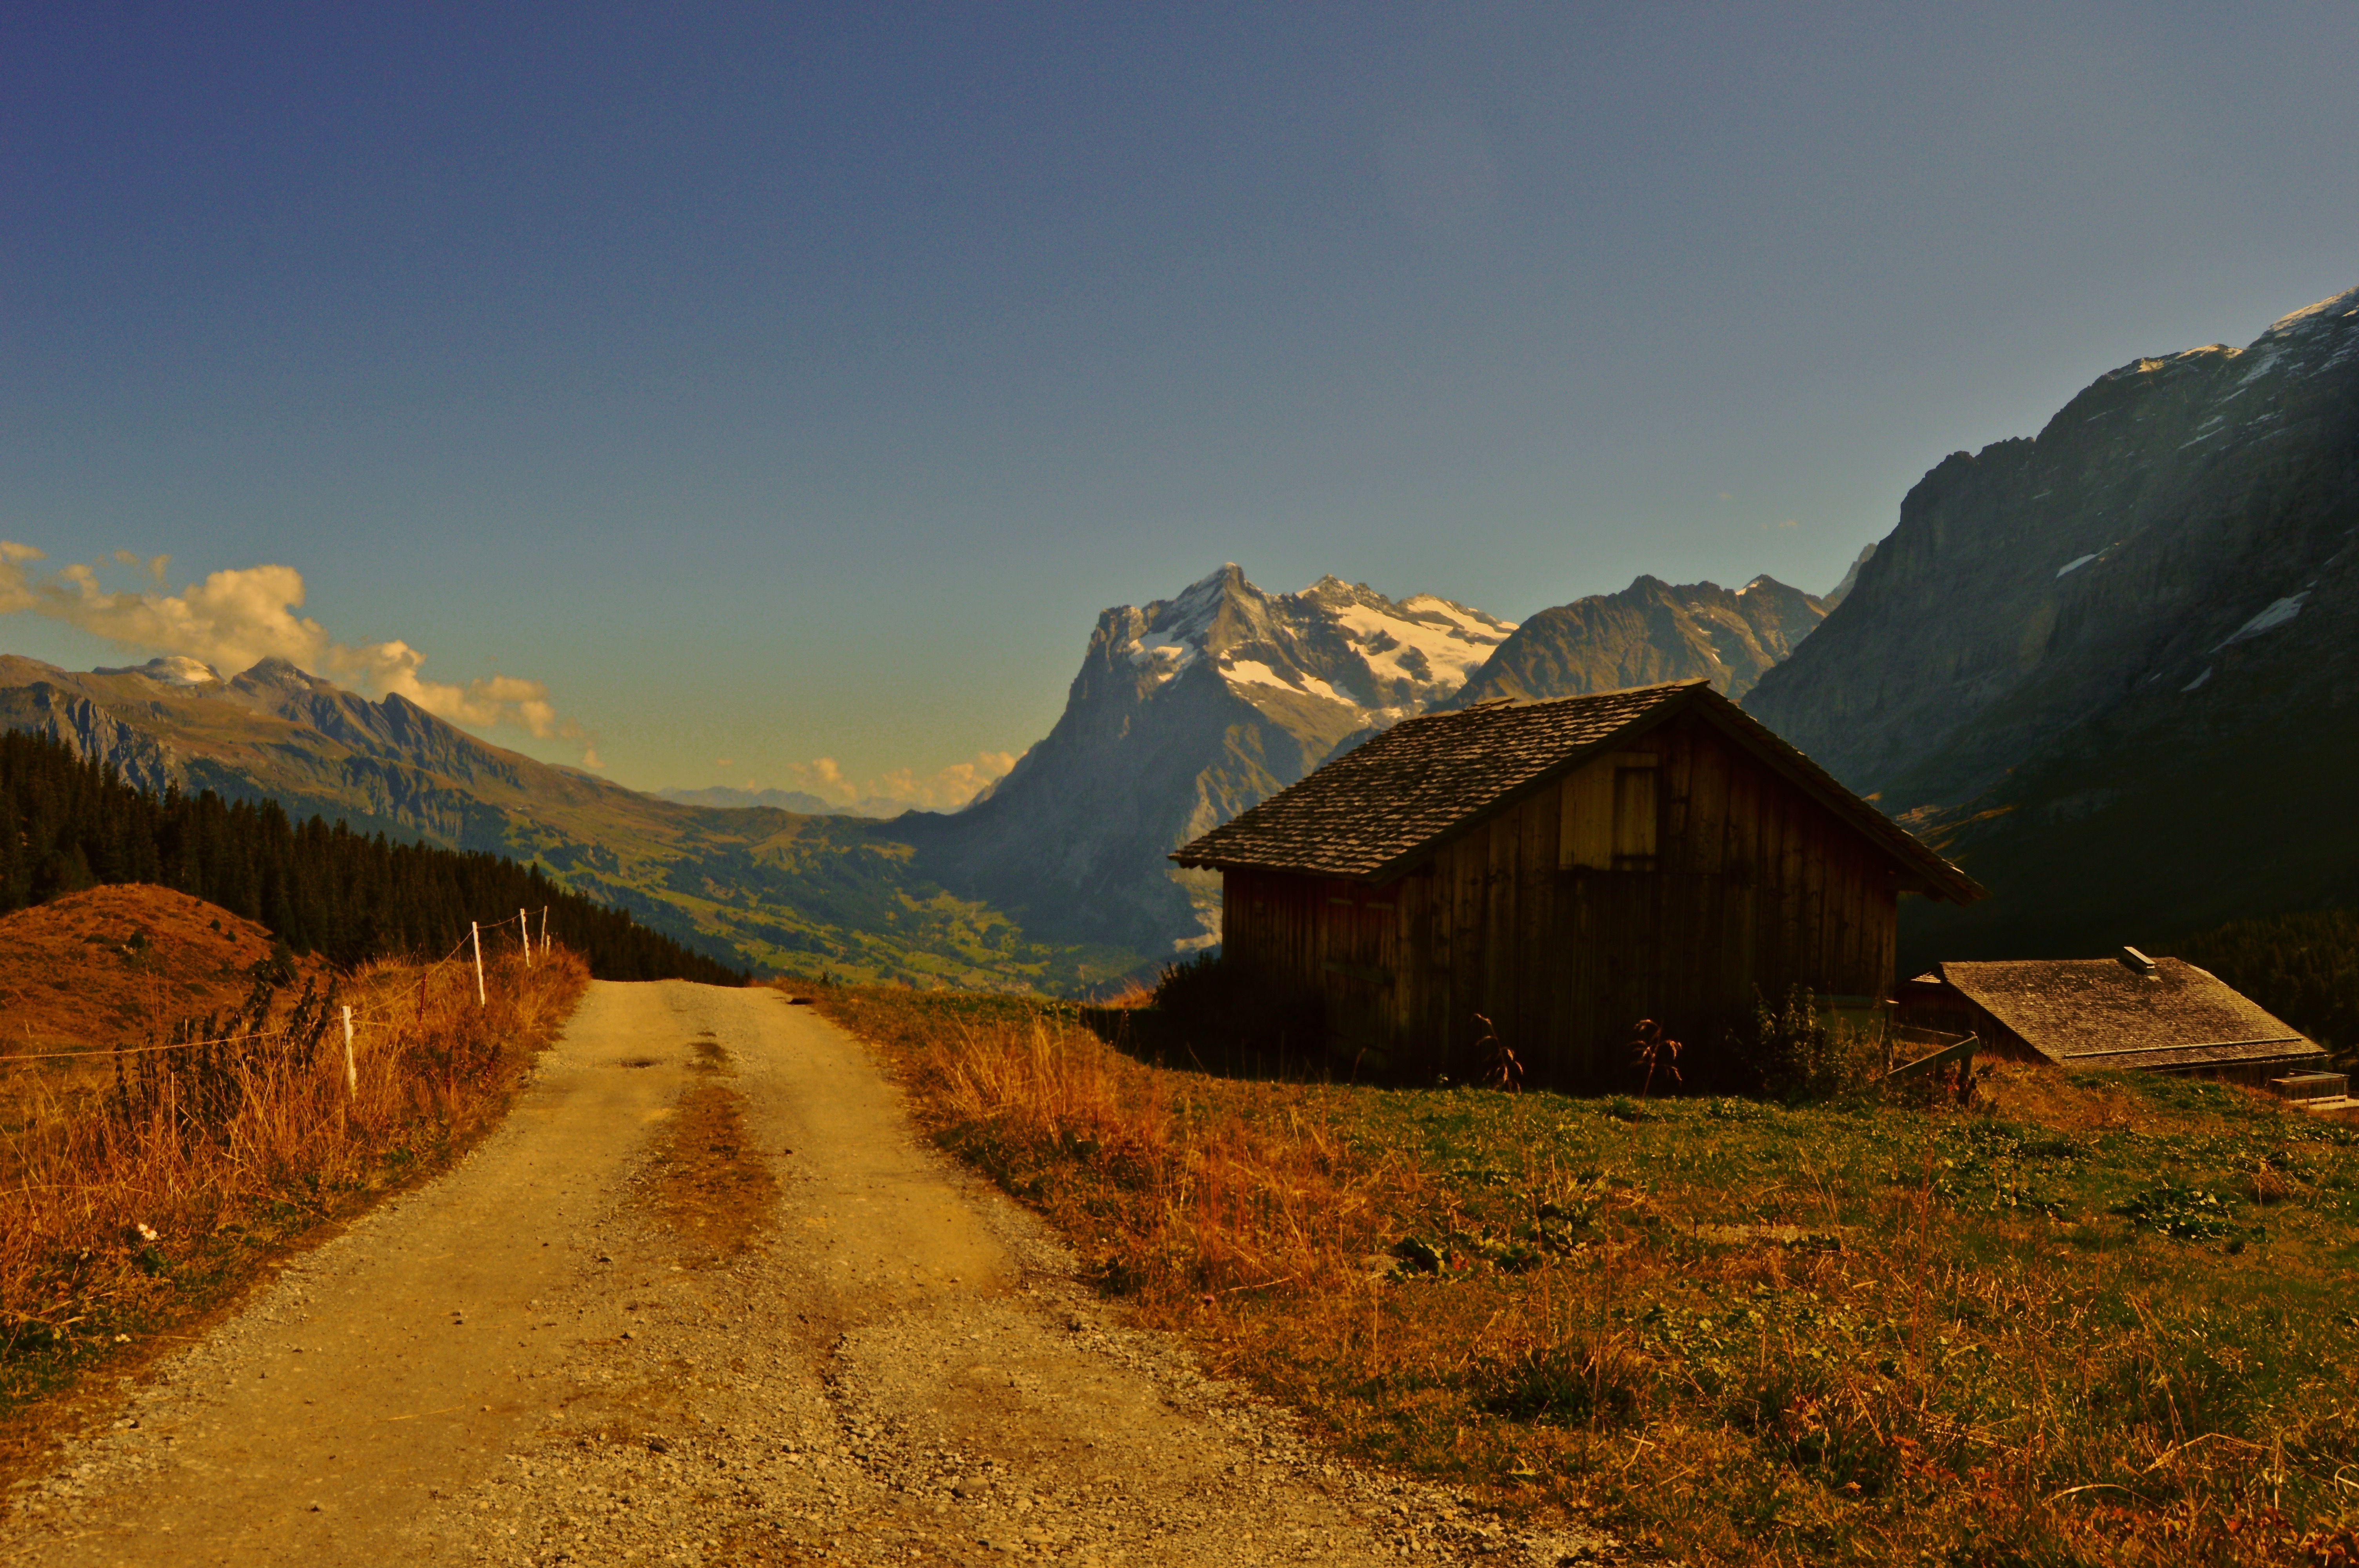 Swiss Alps: A Photo Gallery